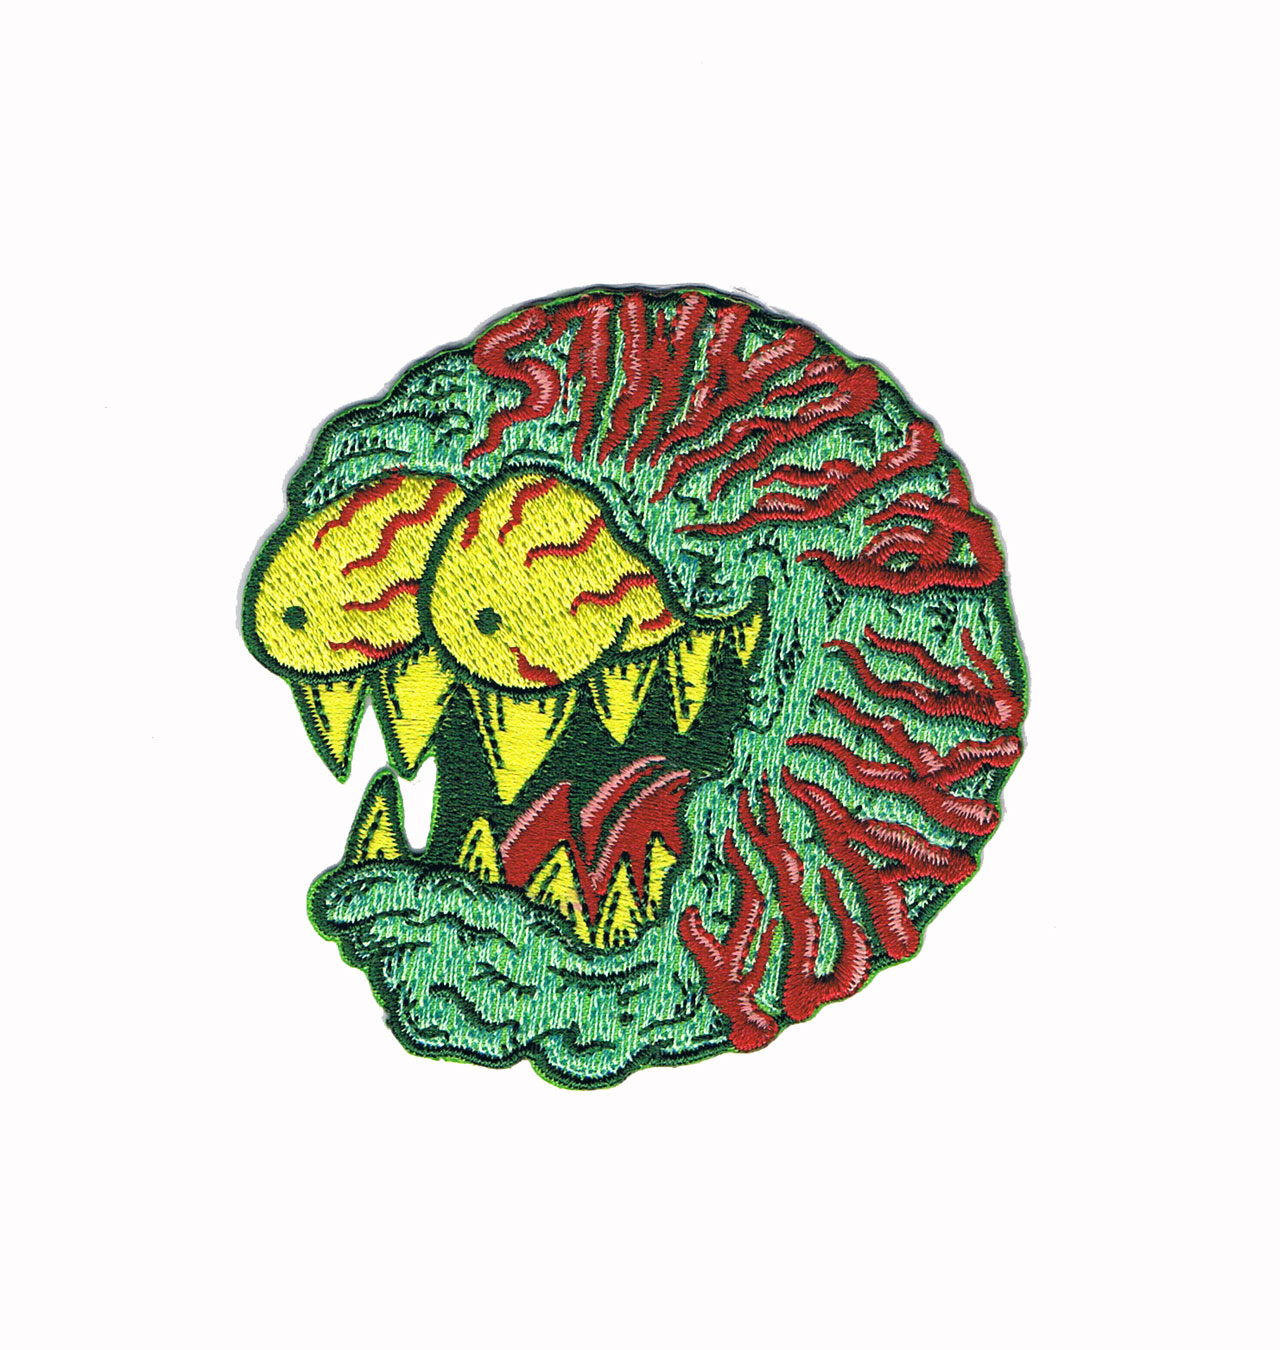 flake-flames-patch-001